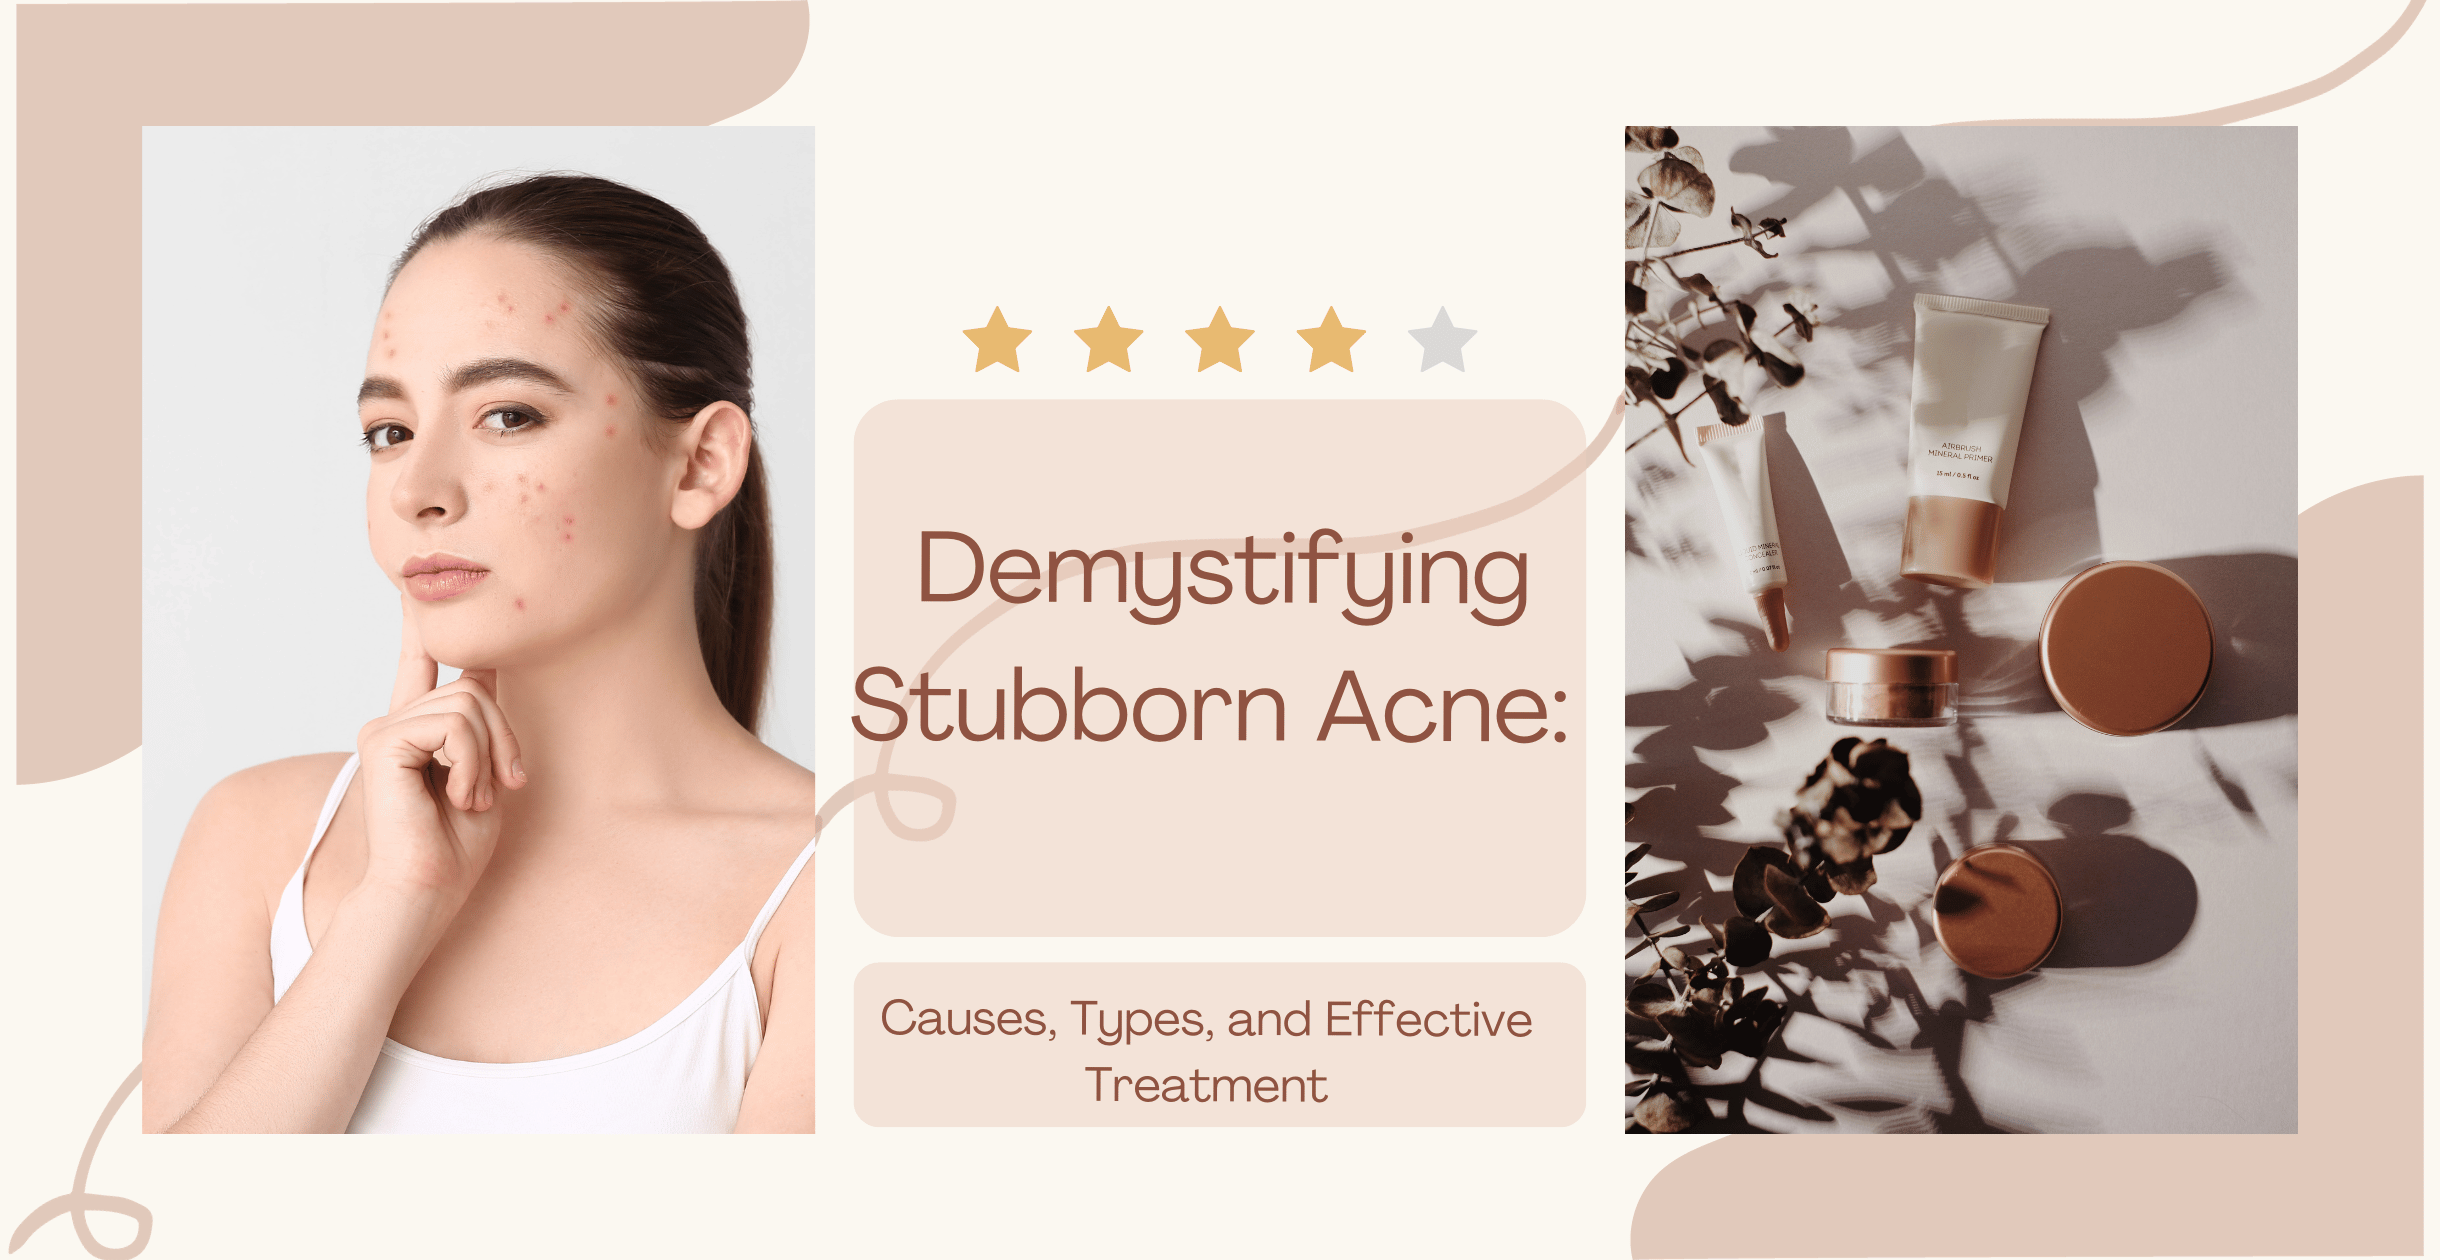 Demystifying Stubborn Acne: Causes, Types, and Effective Treatment